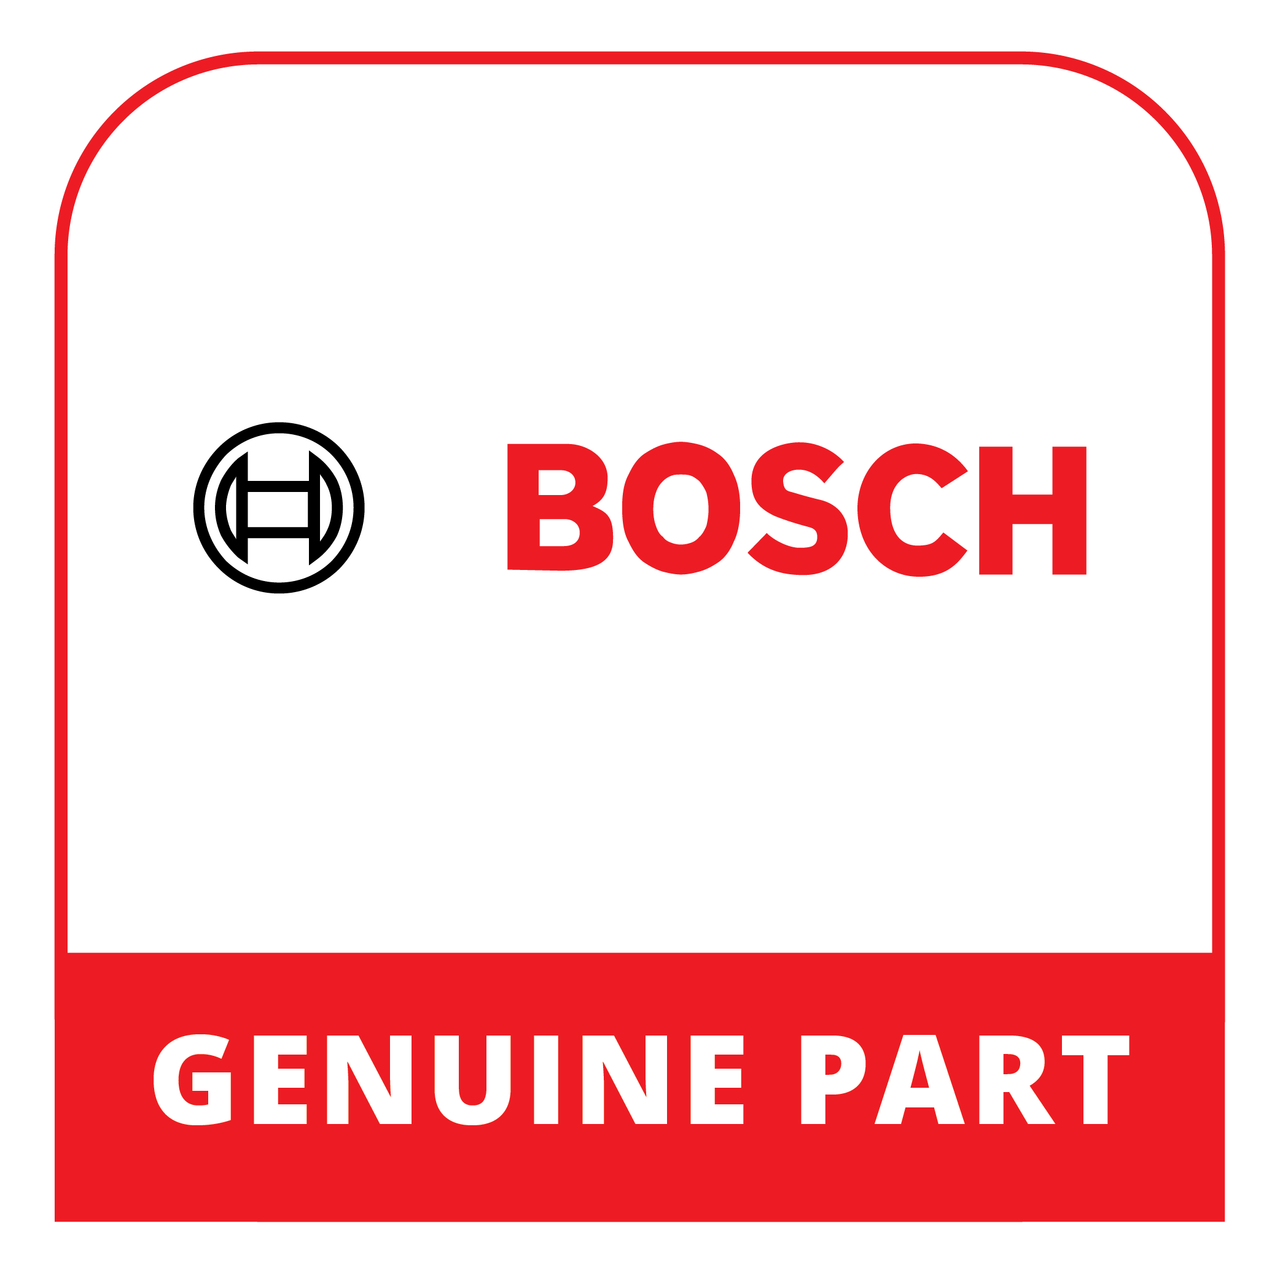 Bosch (Thermador) 11033216 - Panel - Genuine Bosch (Thermador) Part